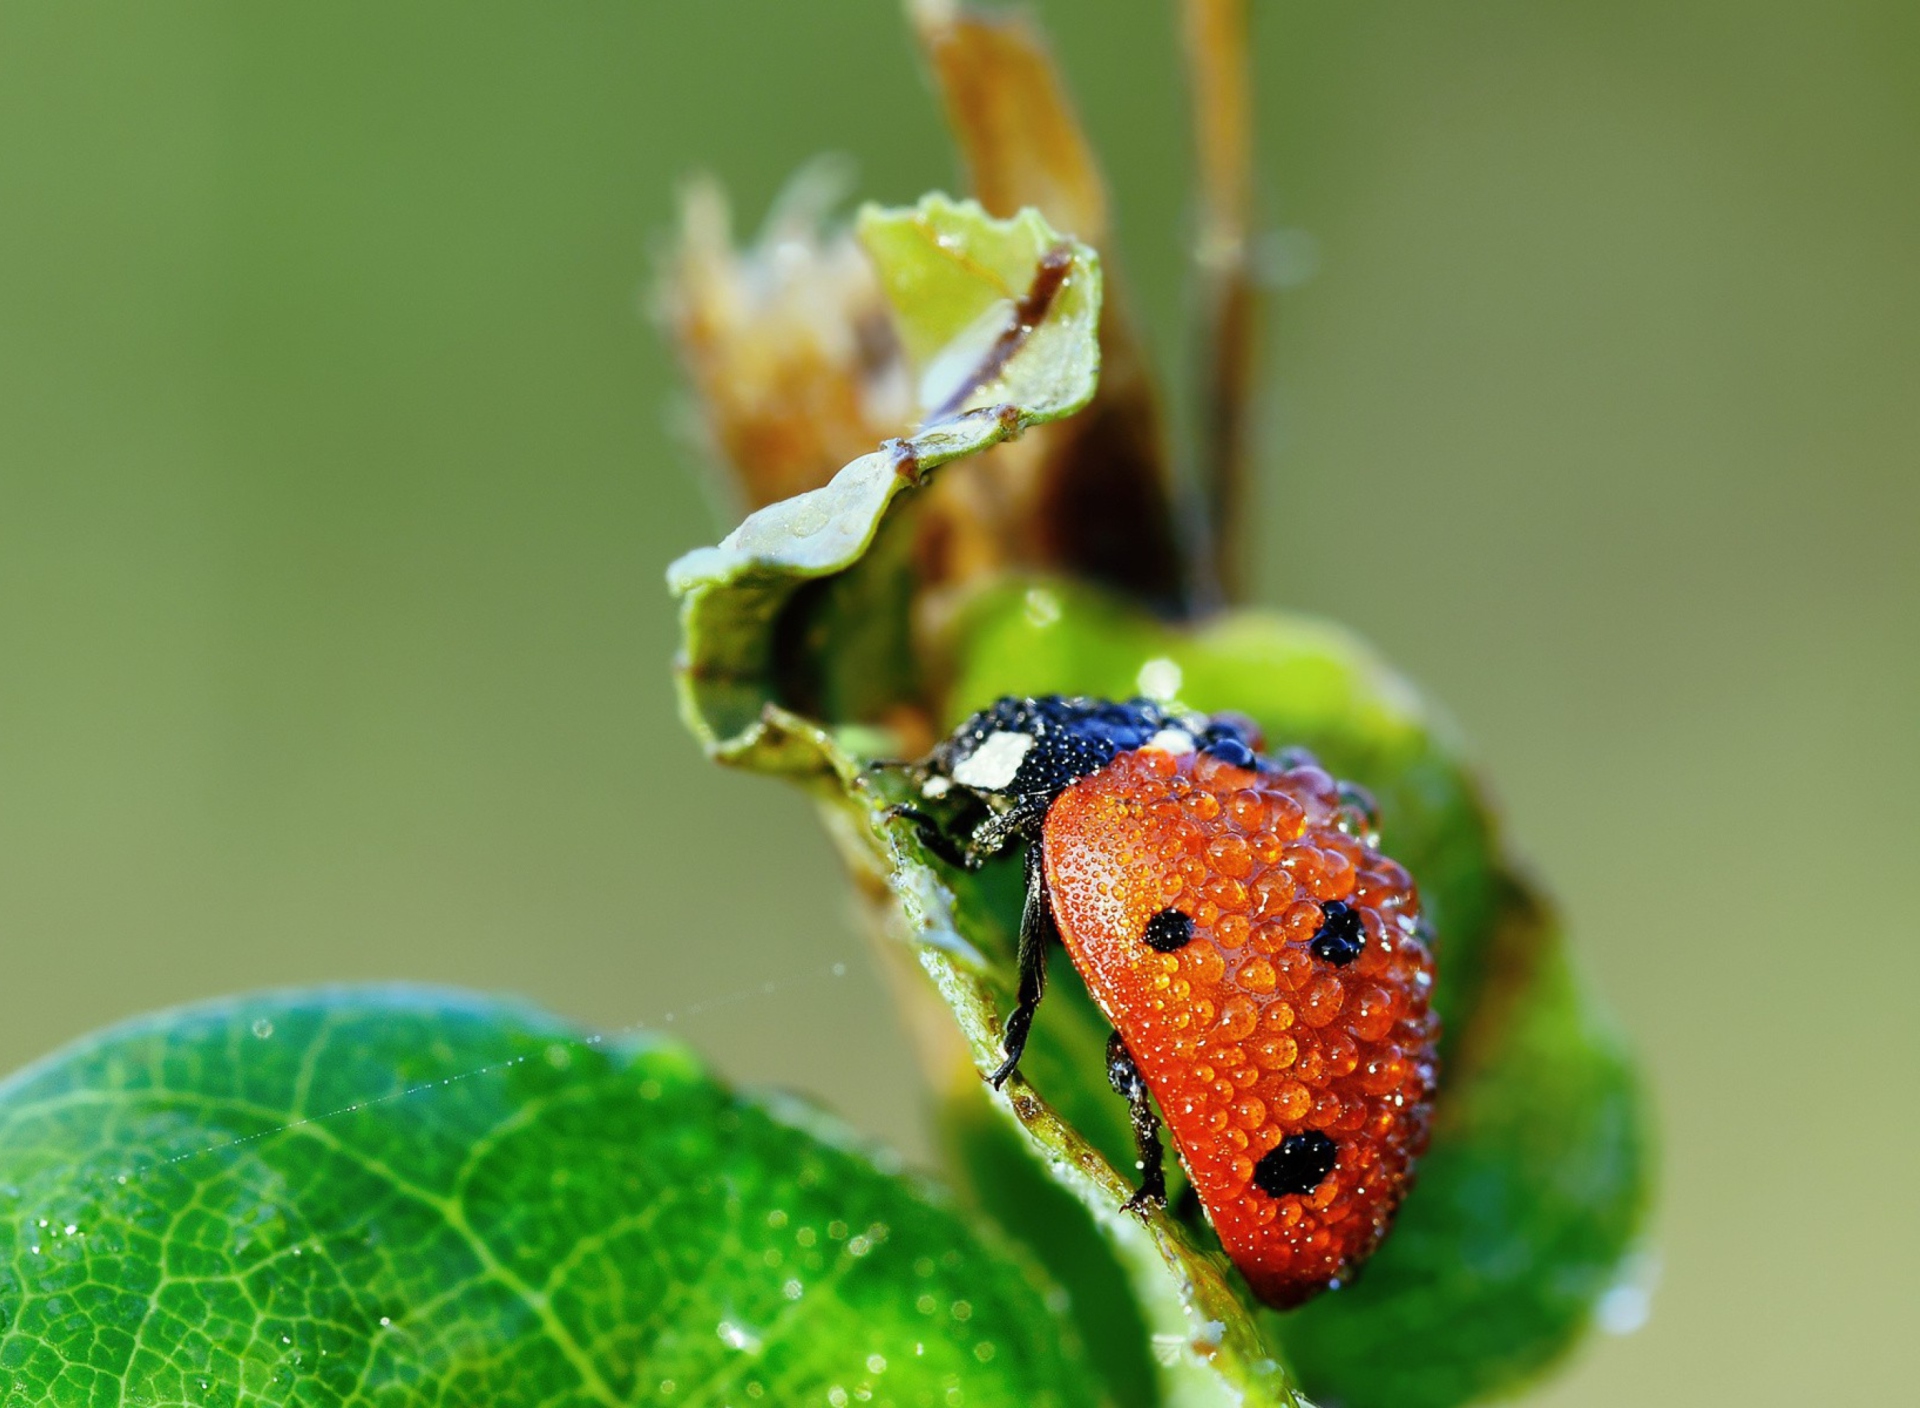 Ladybug Covered With Dew Drops wallpaper 1920x1408